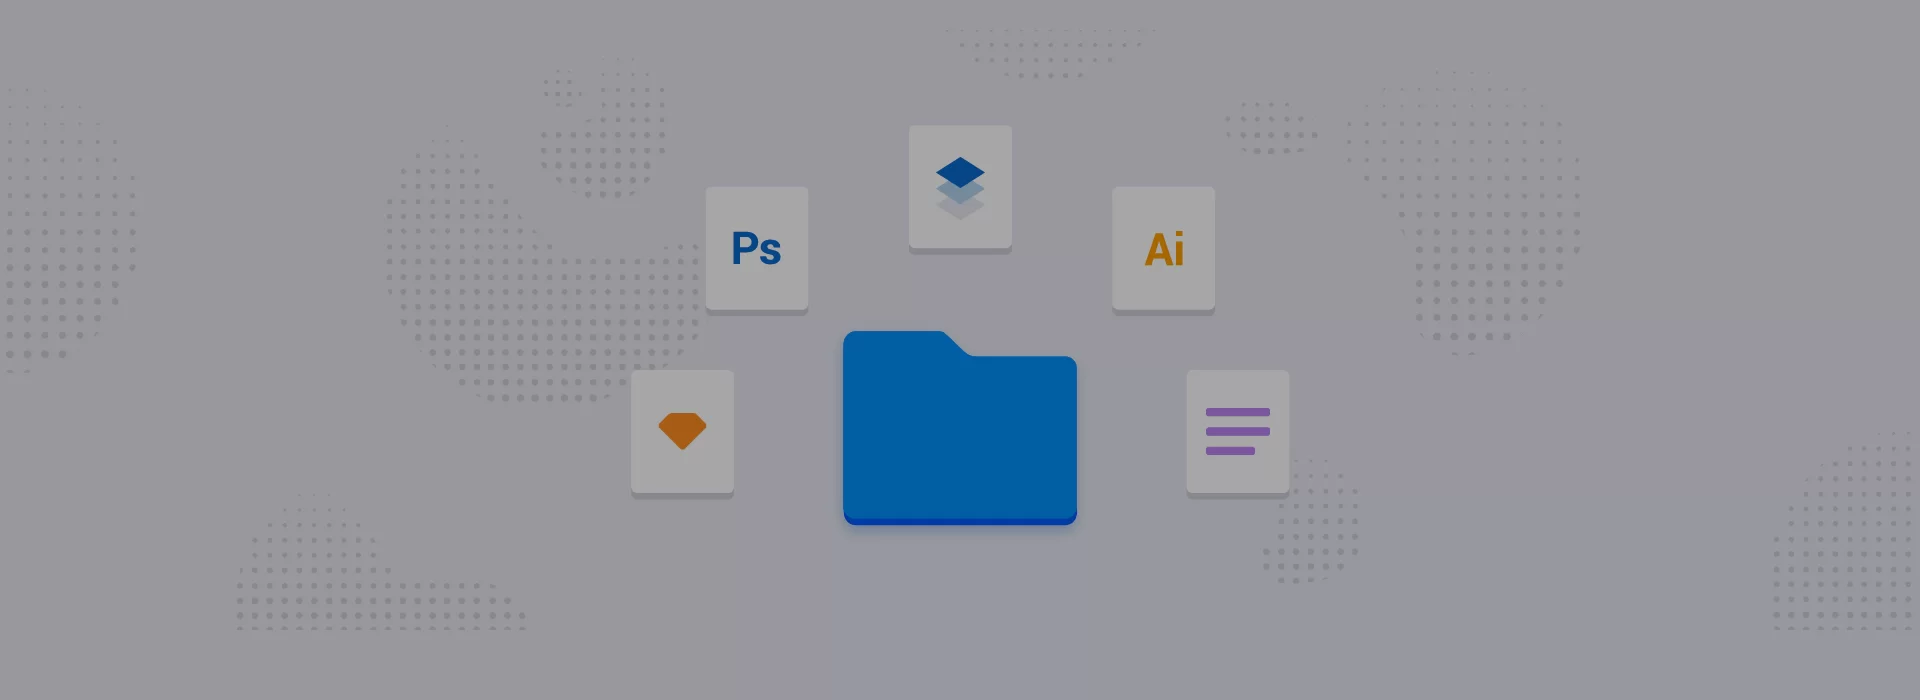 Web designers methods and tools for enhancing a workflow